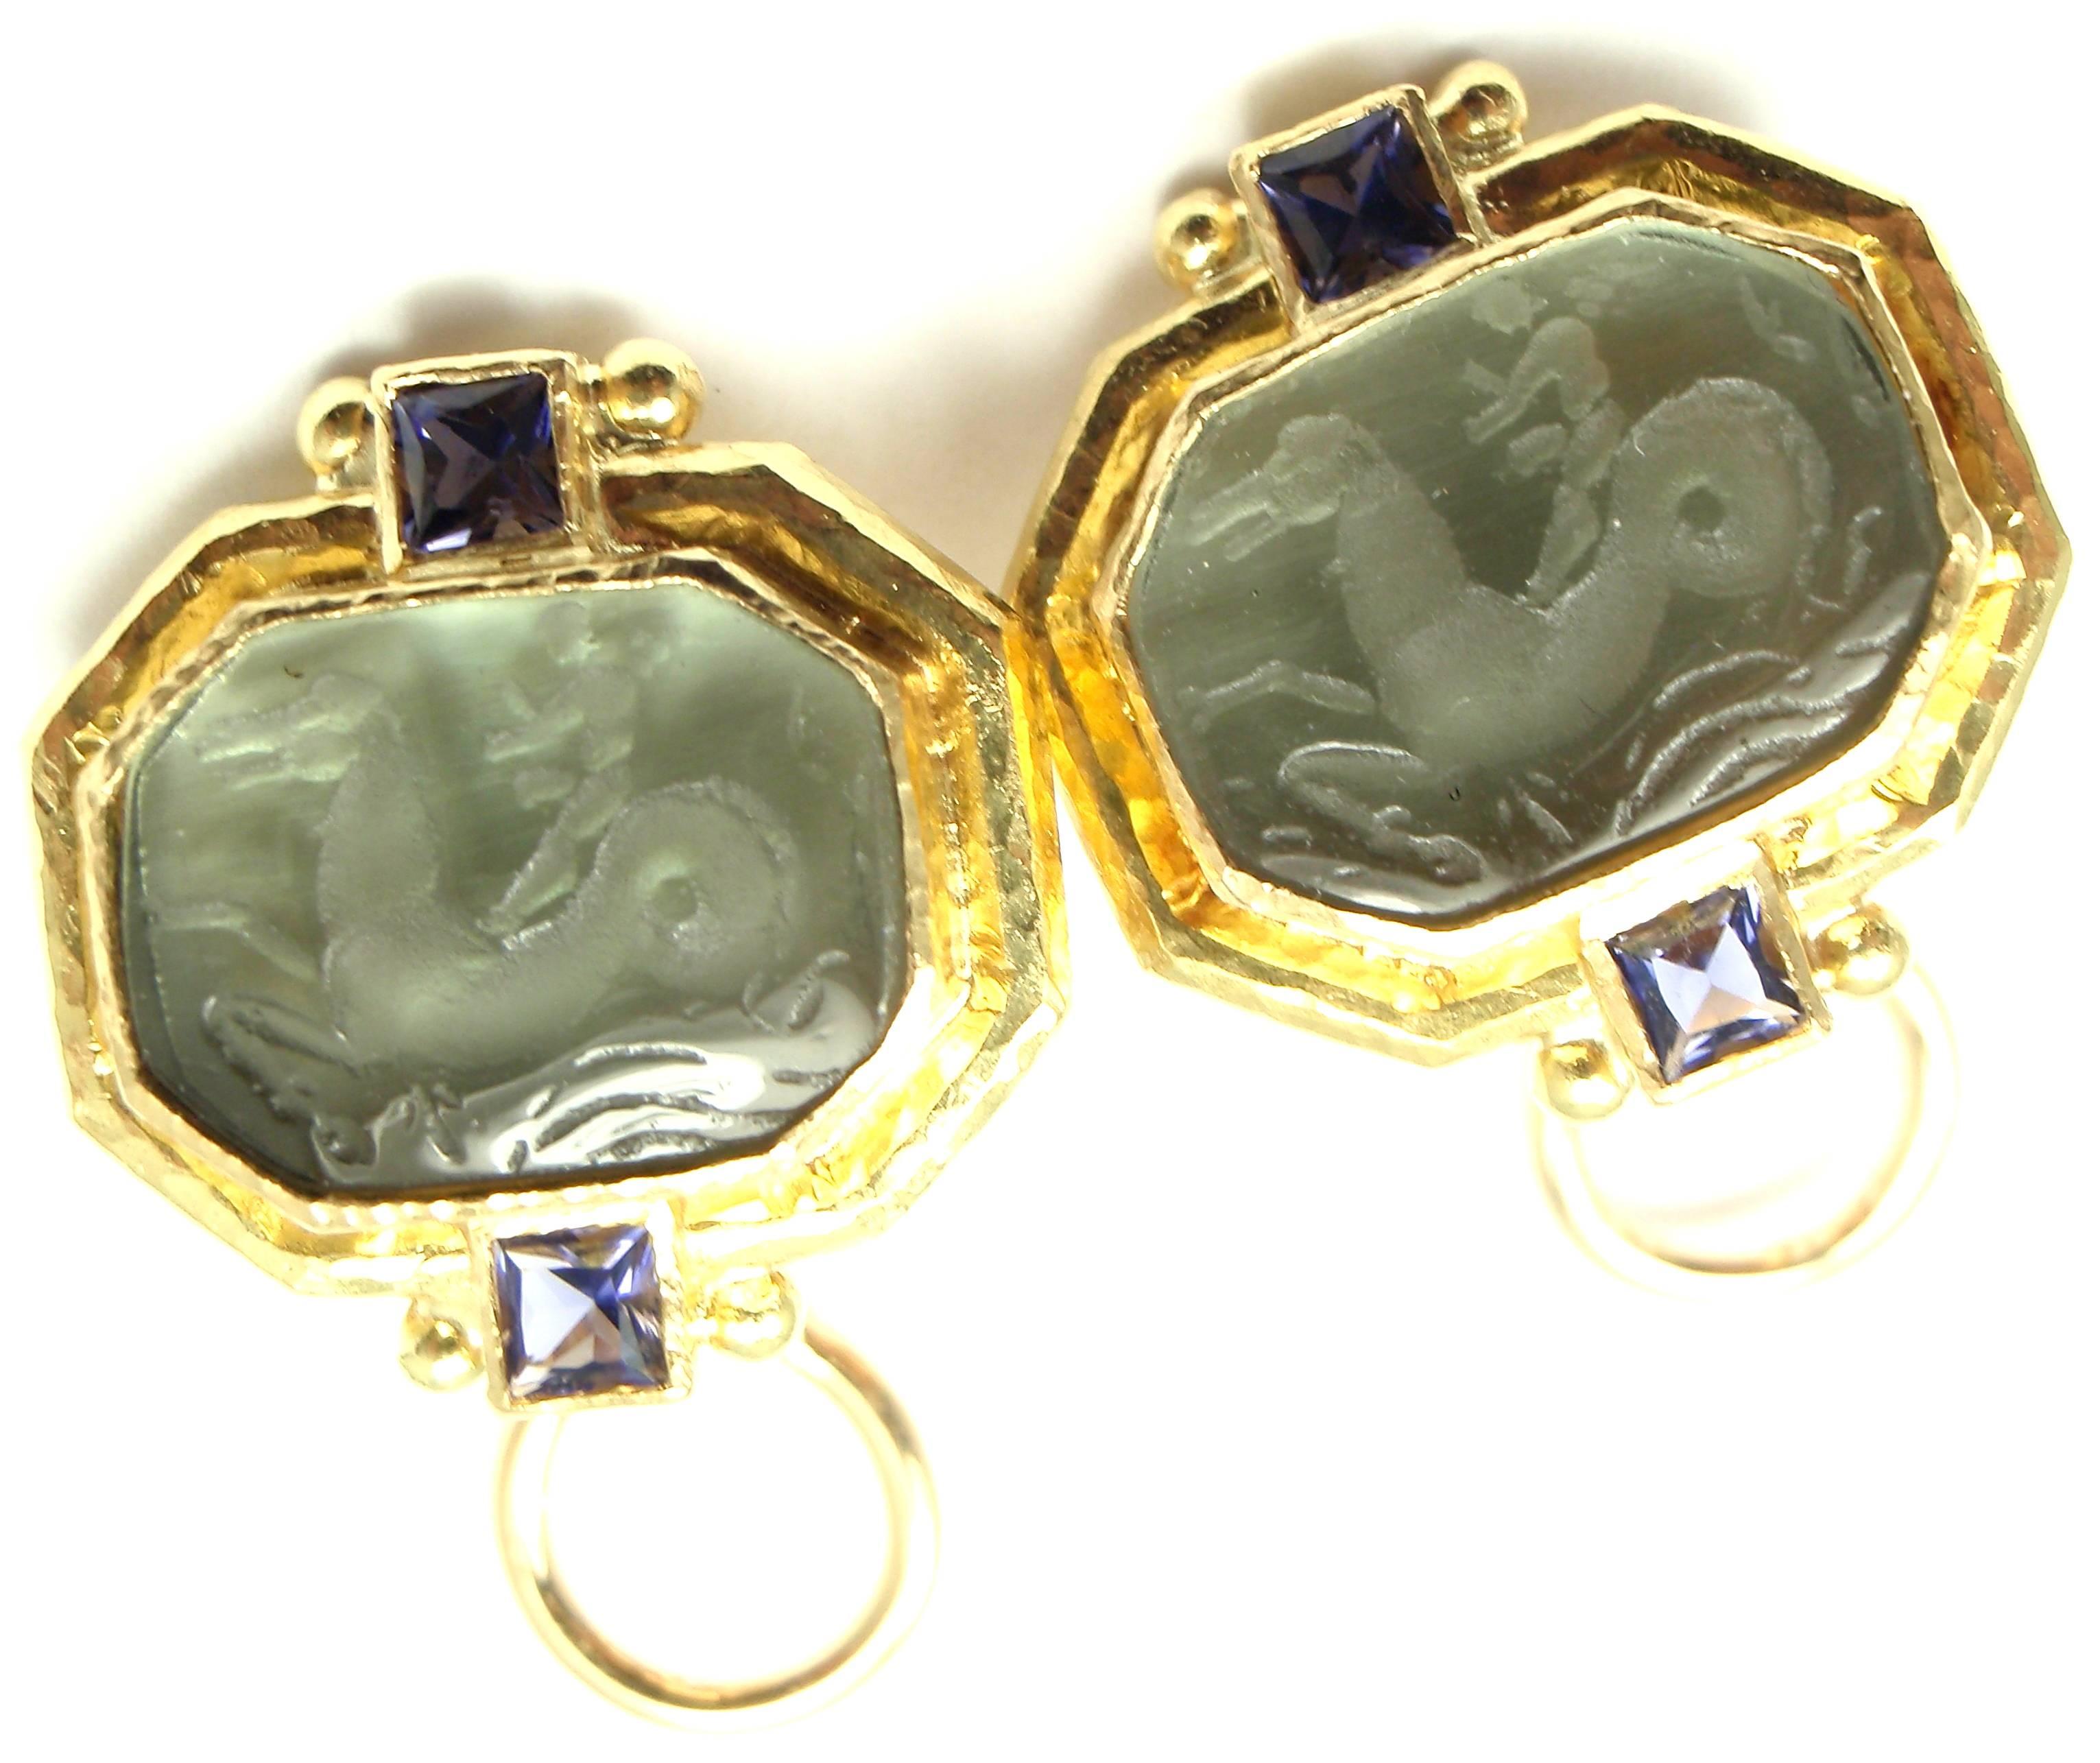 19k Yellow Gold Venetian Glass Intaglio Iolite Earrings by Elizabeth Locke. 
With venetian green glass intaglio of a horse and 4 iolites

Details:
Measurements: 20mm x 20mm
Weight: 17.1 grams
Backs: Collapsible posts with omega backs
Stamped